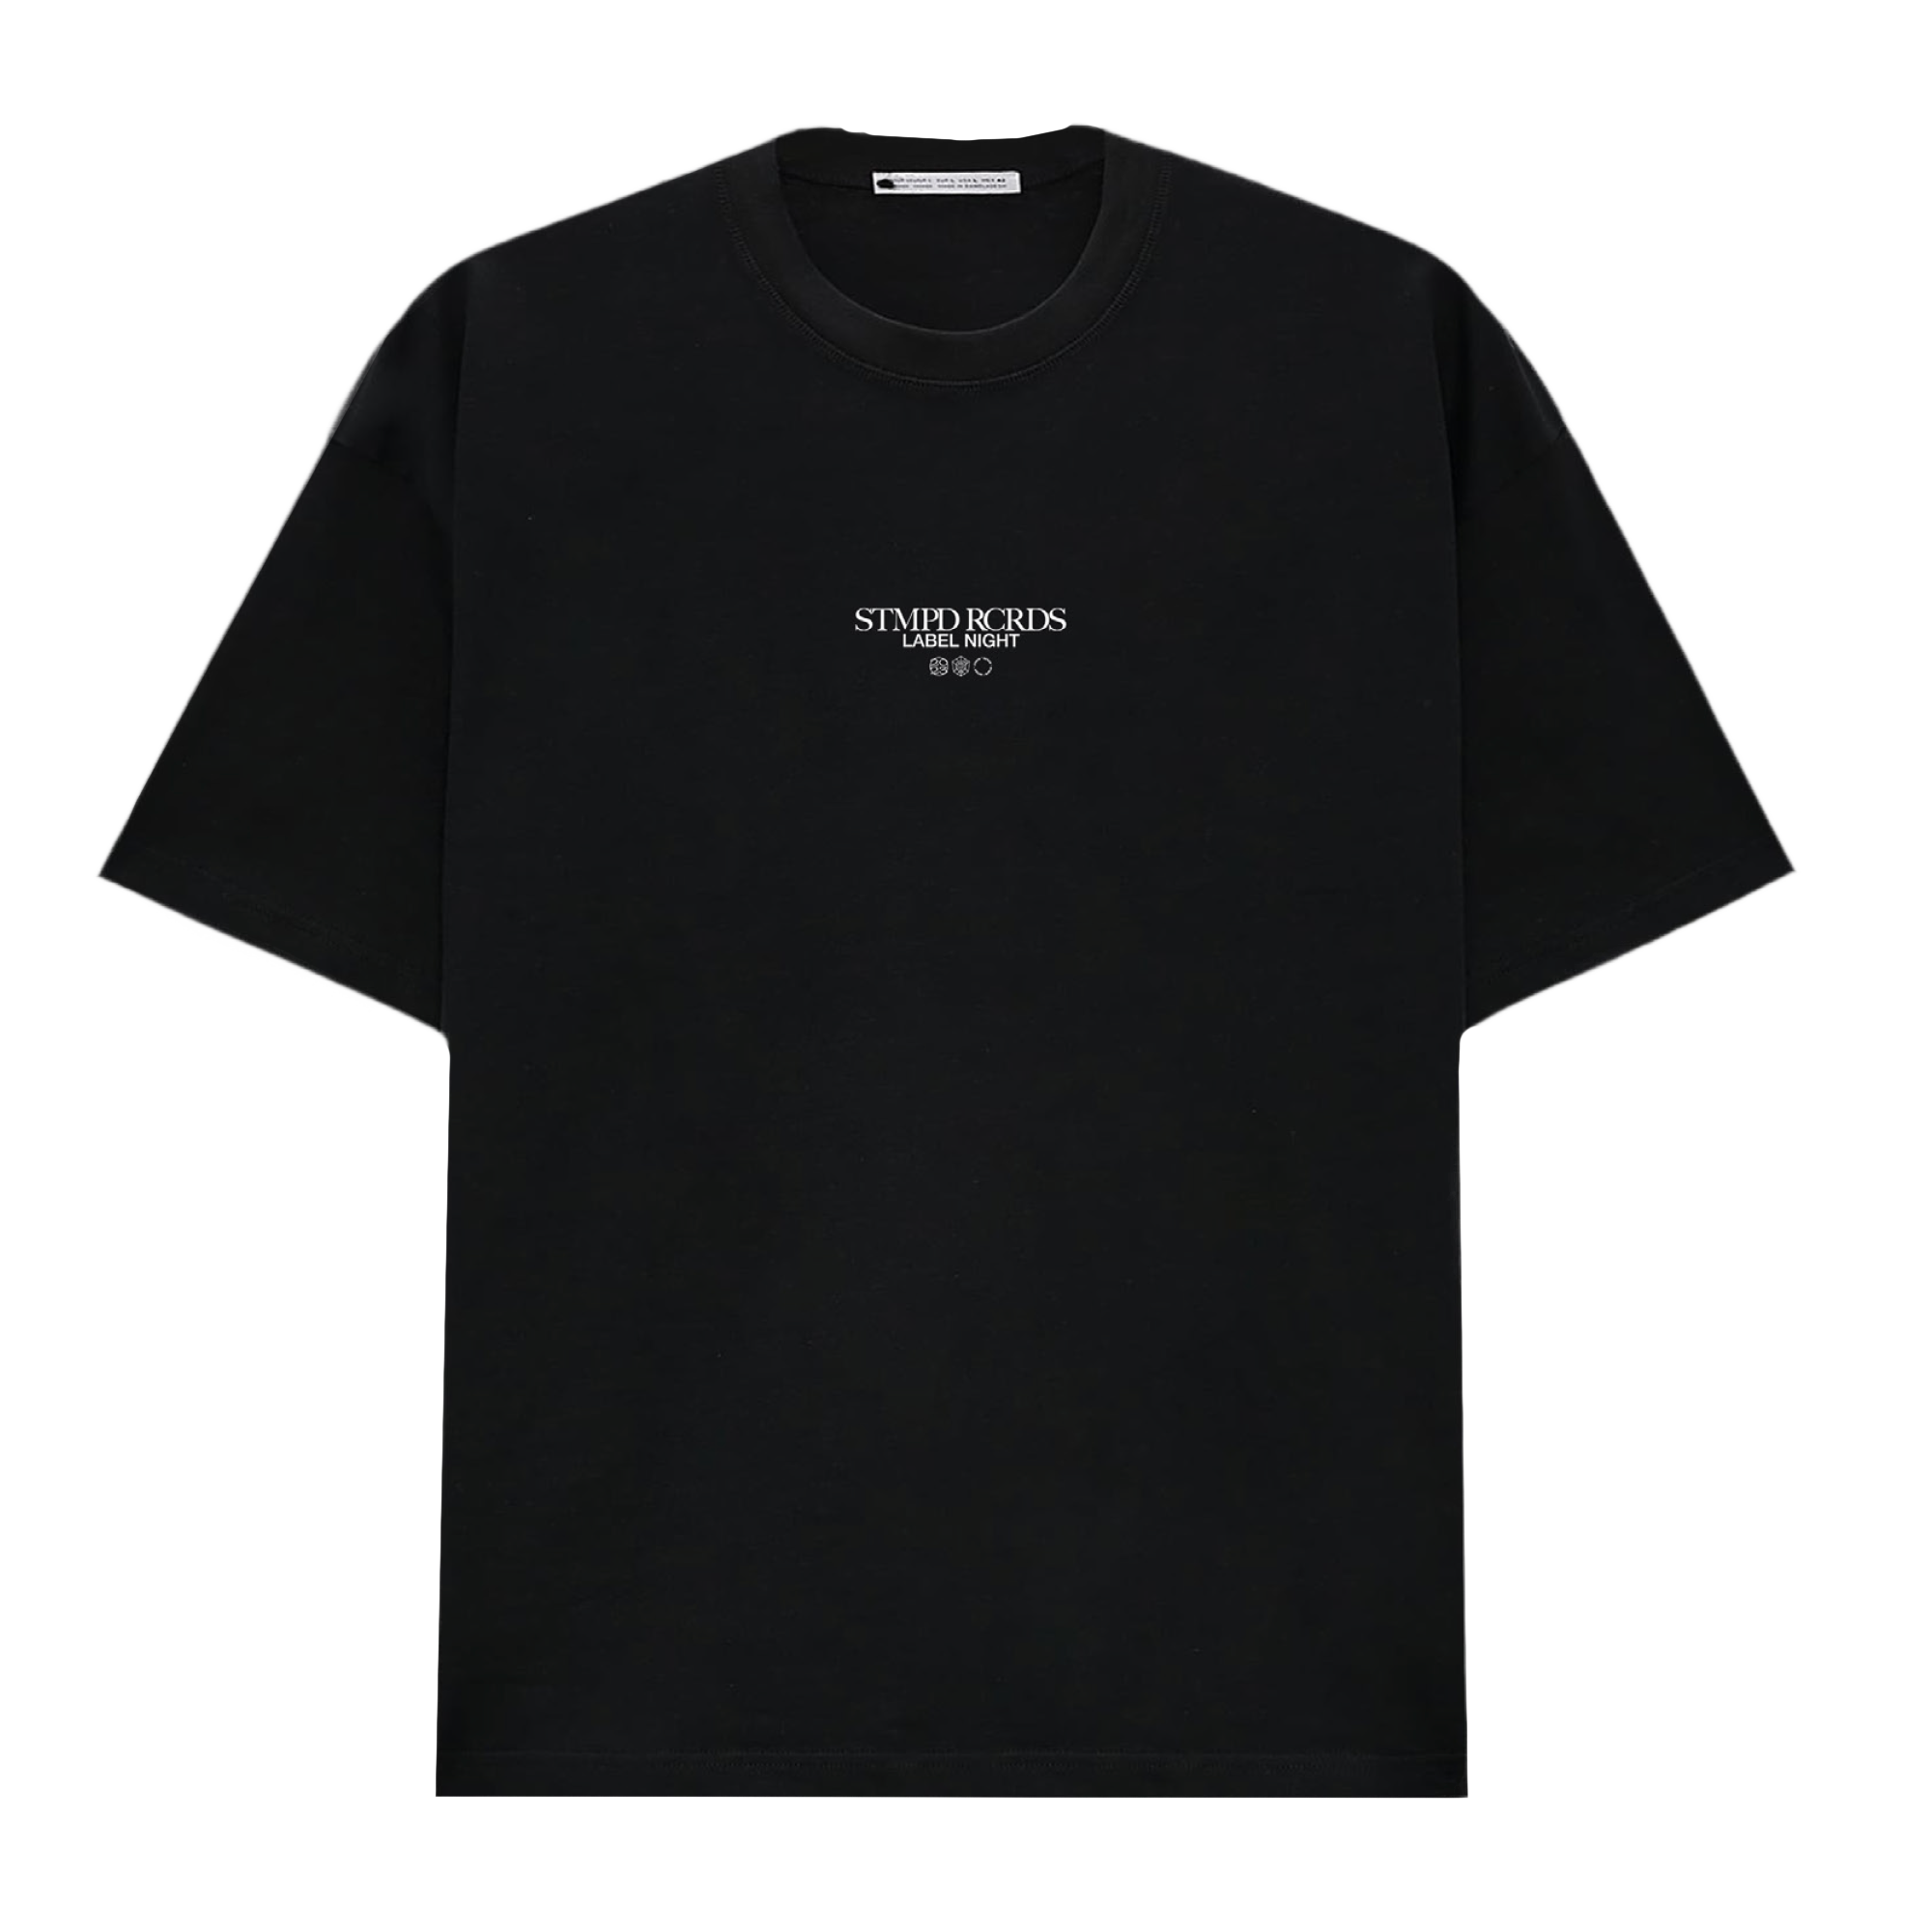 STMPD Label Night T-Shirt - Official STMPD RCRDS Merchandise– The ...